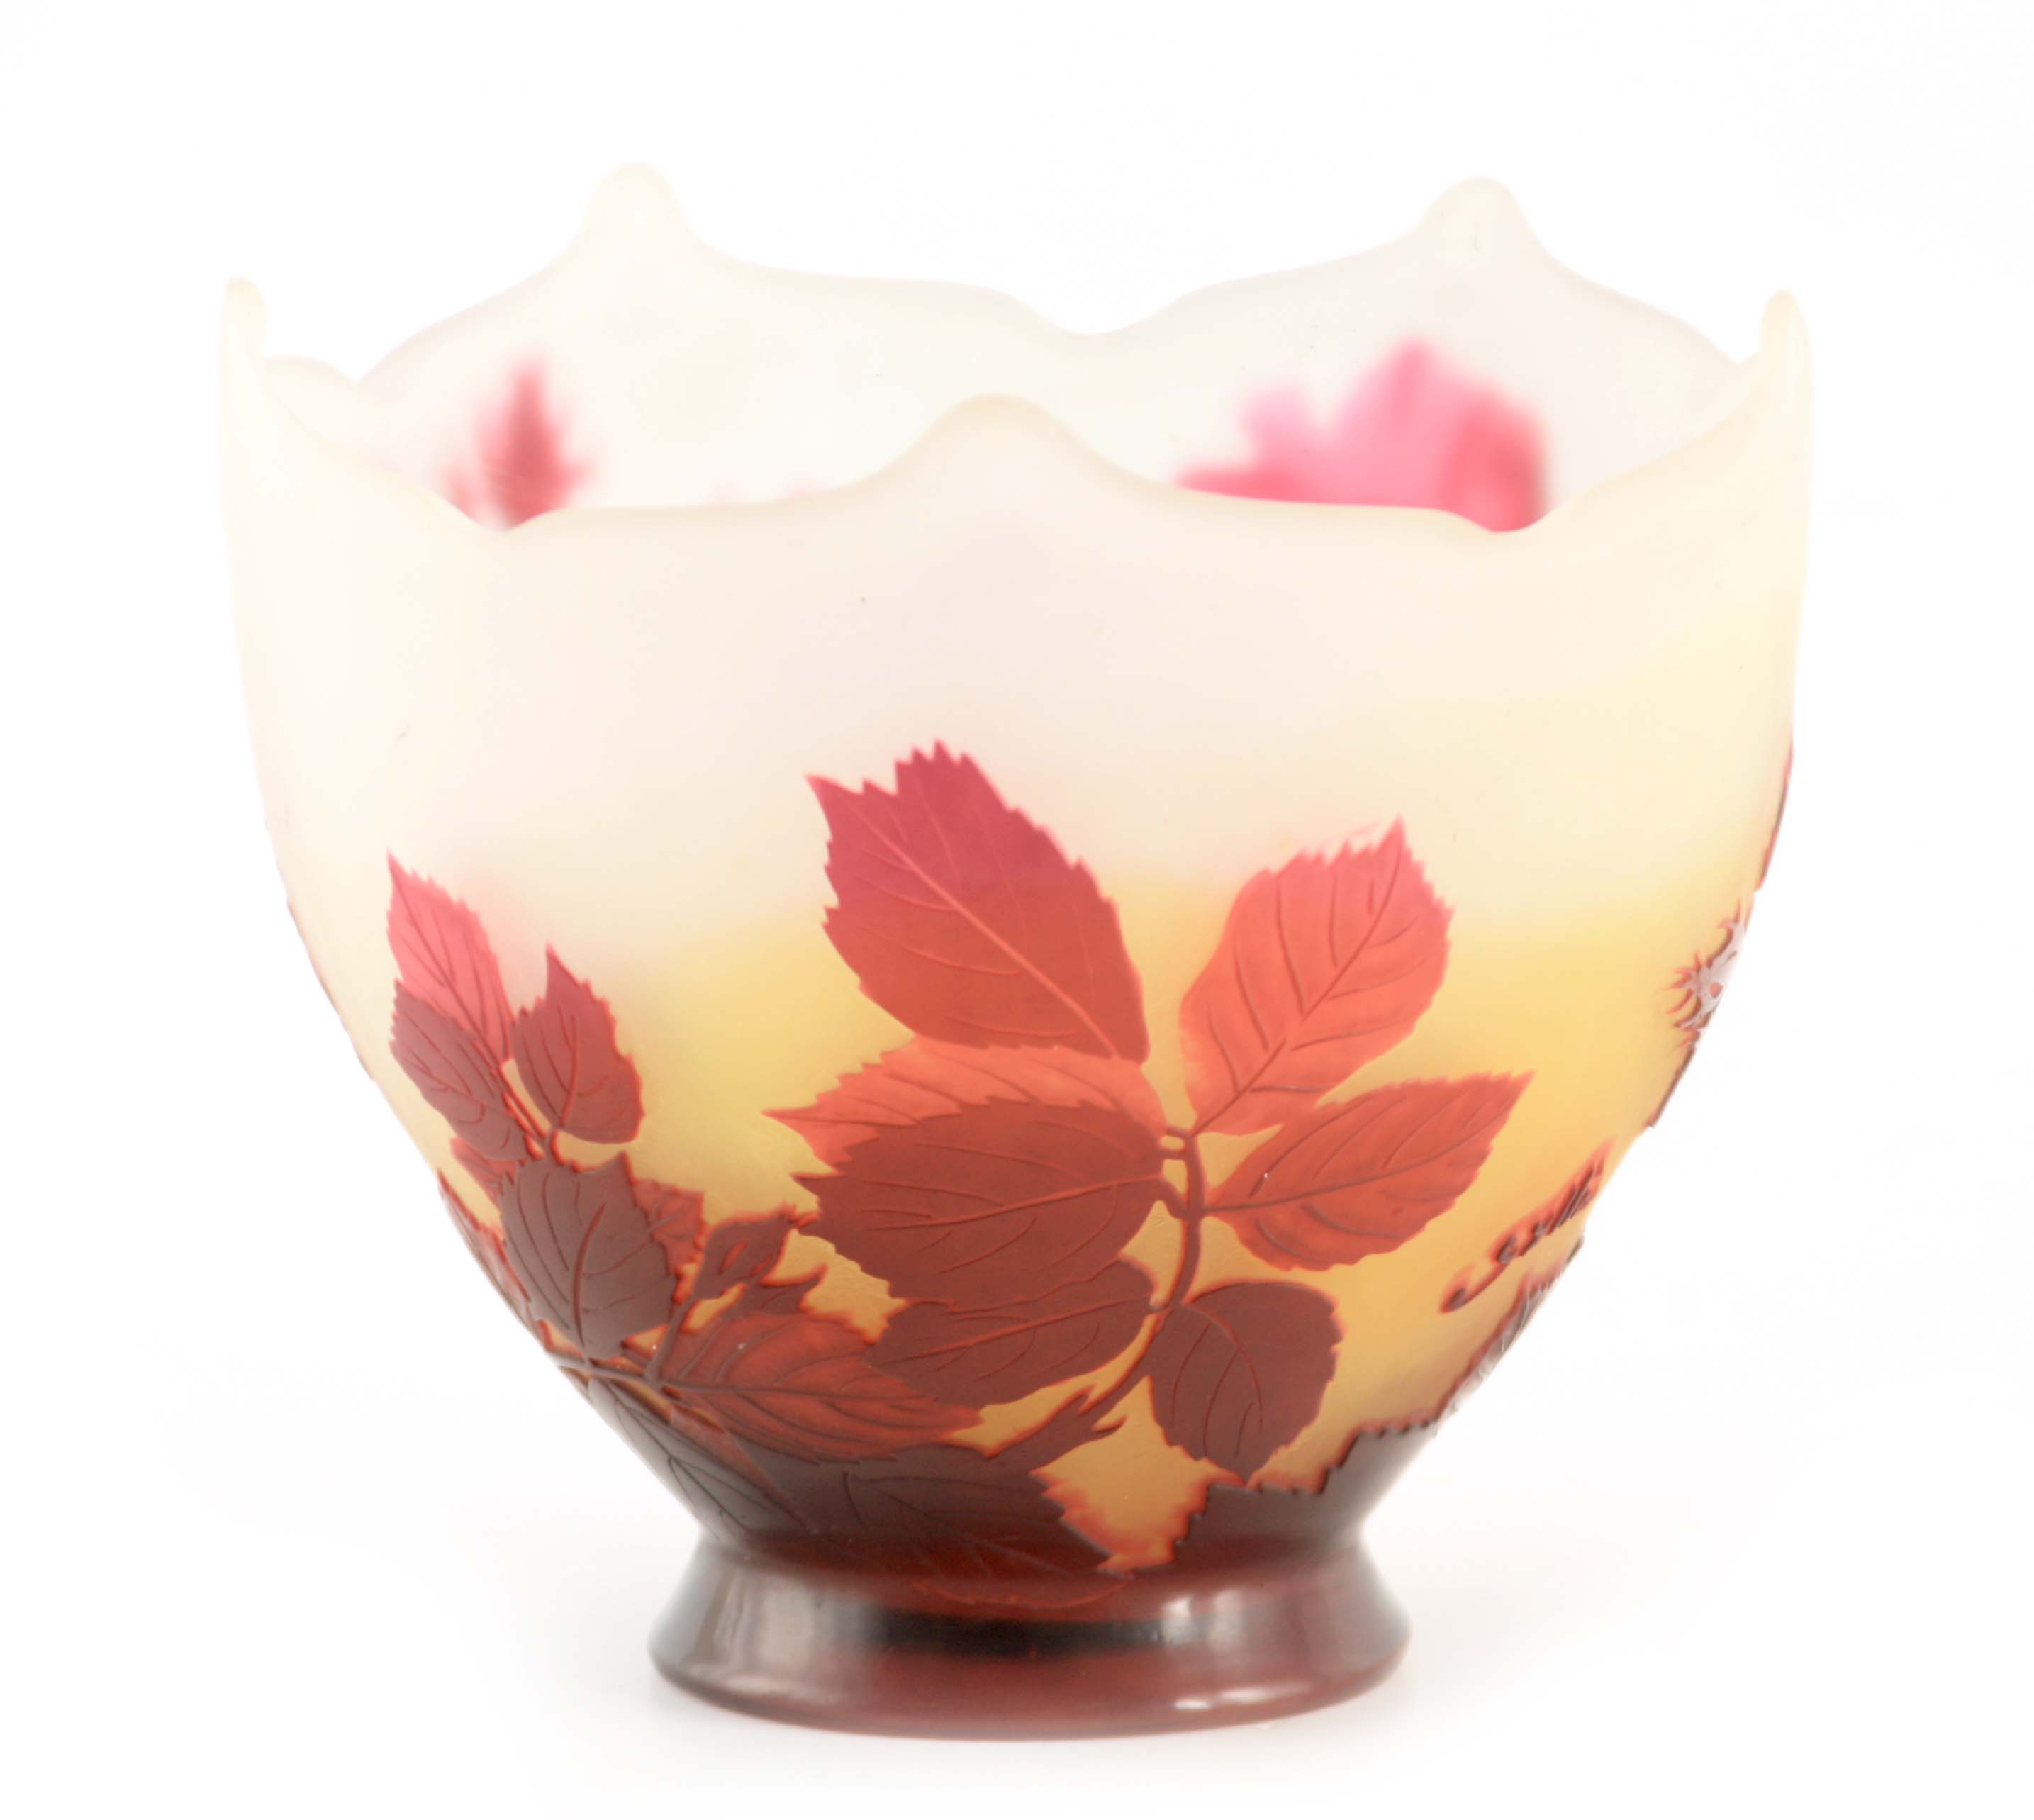 EMILE GALLE. A THREE COLOUR CAMEO GLASS VASE CIRCA 1900 with original Galle label to the